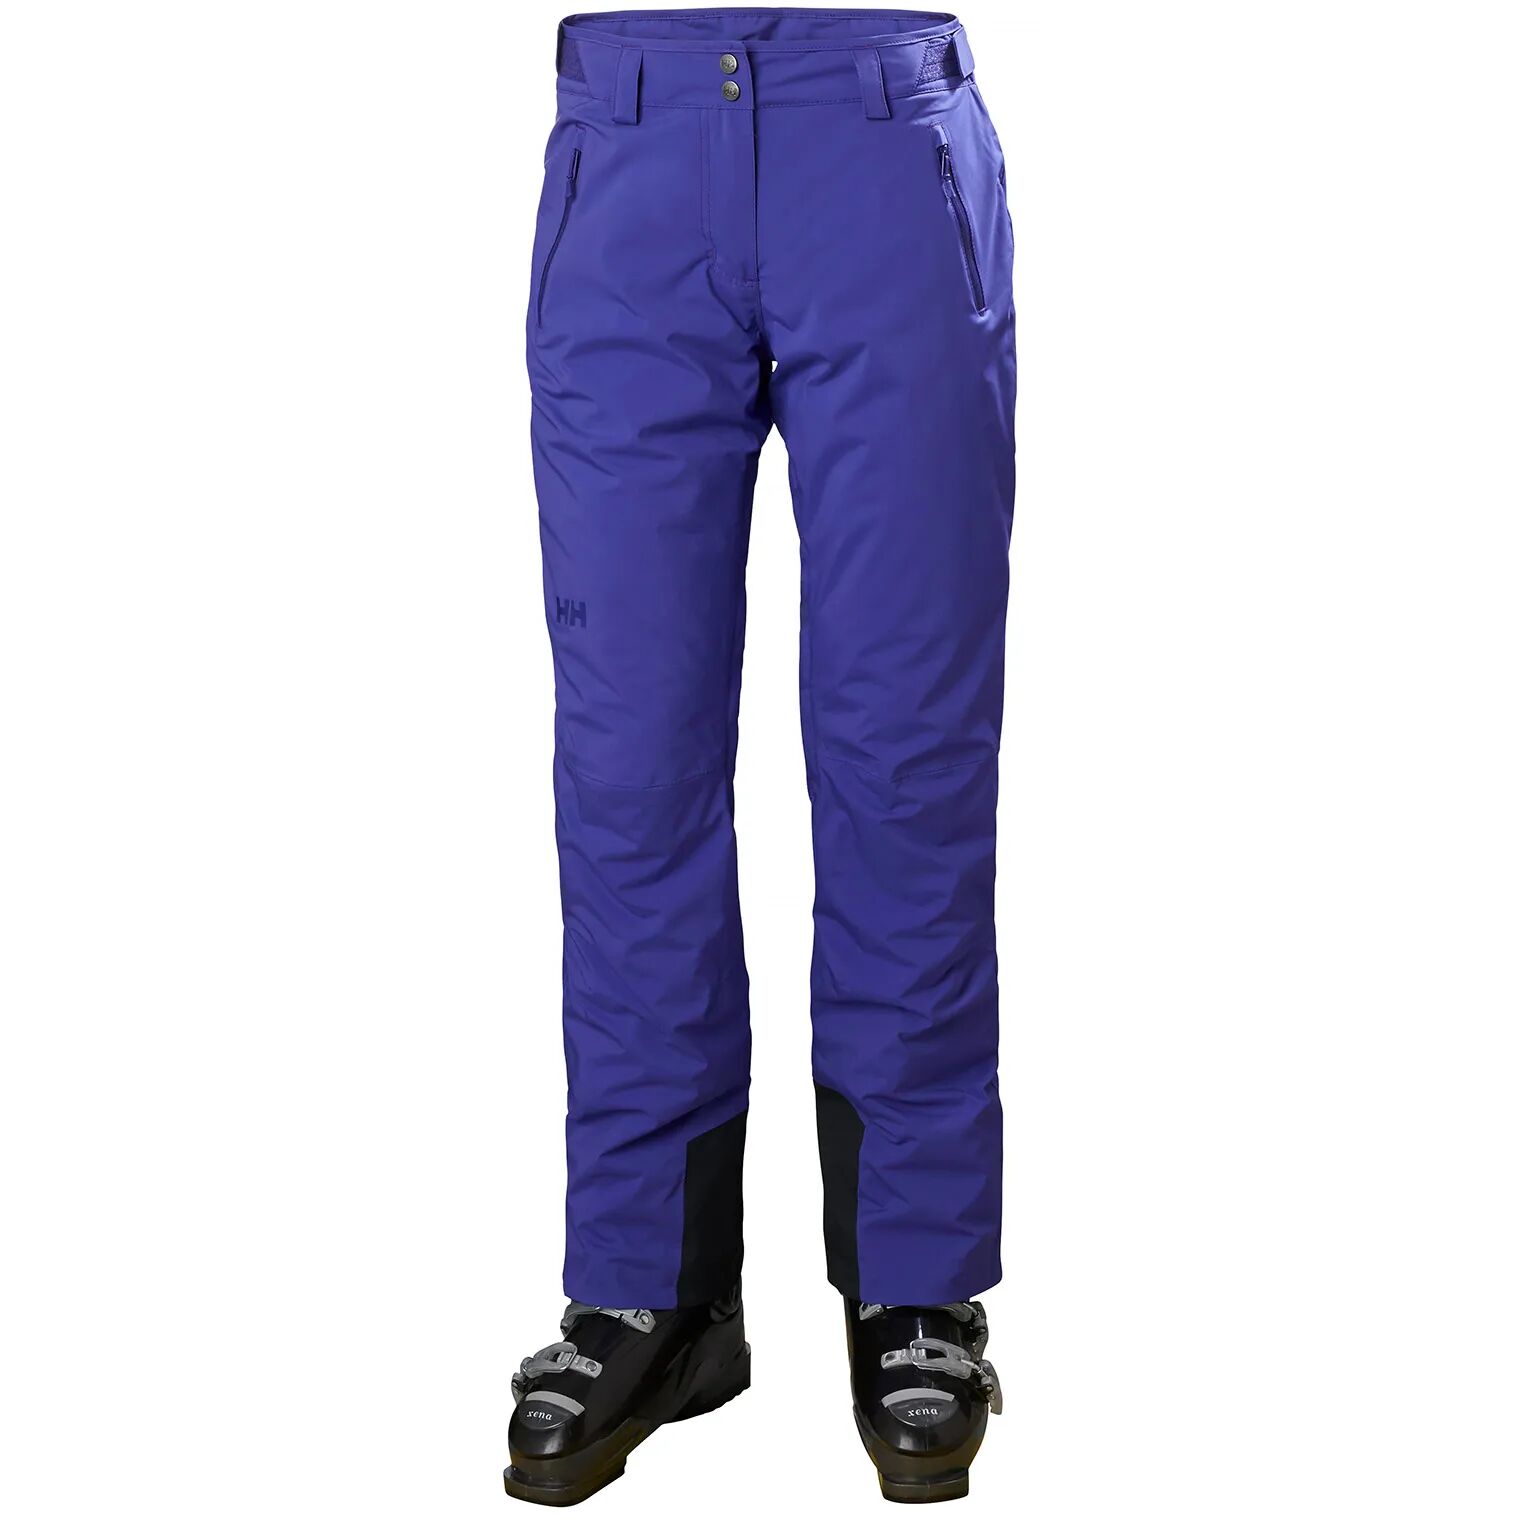 Helly Hansen Dame Legendary Insulated Trousers Skibukse XL